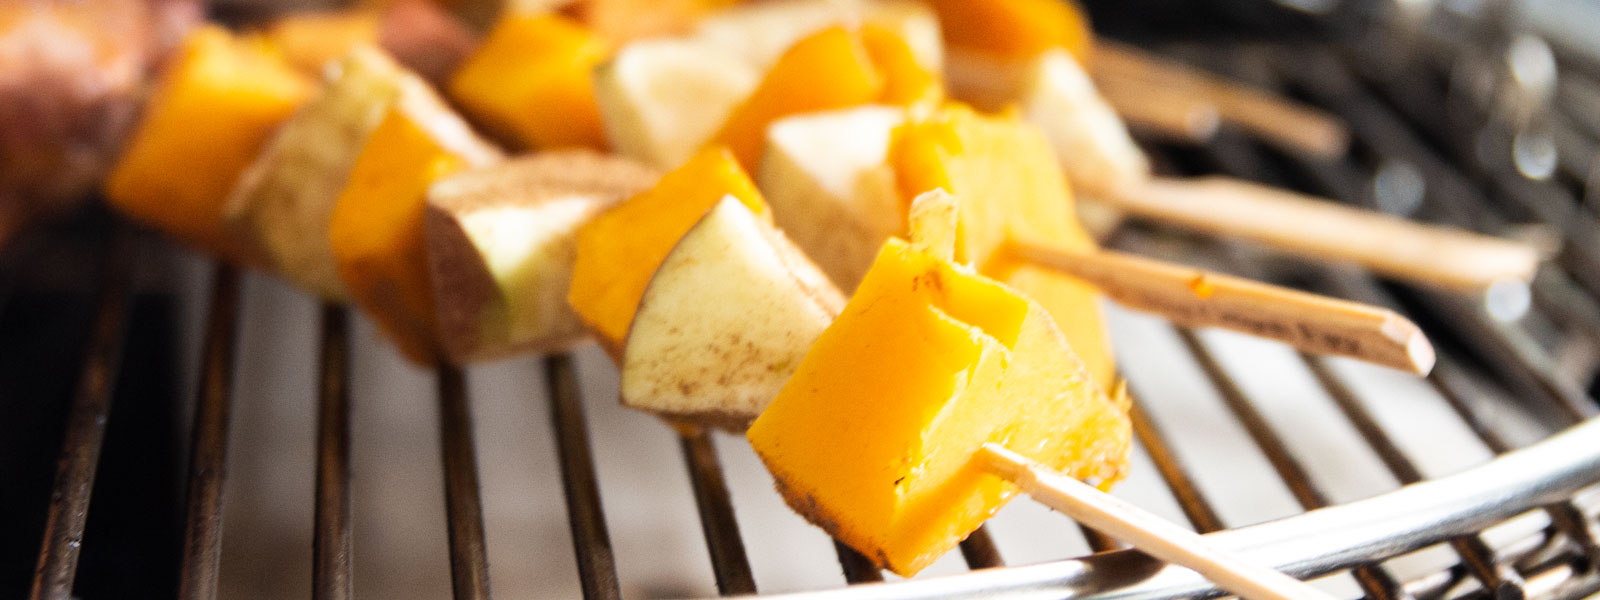 Butternut Squash and Apple Skewers